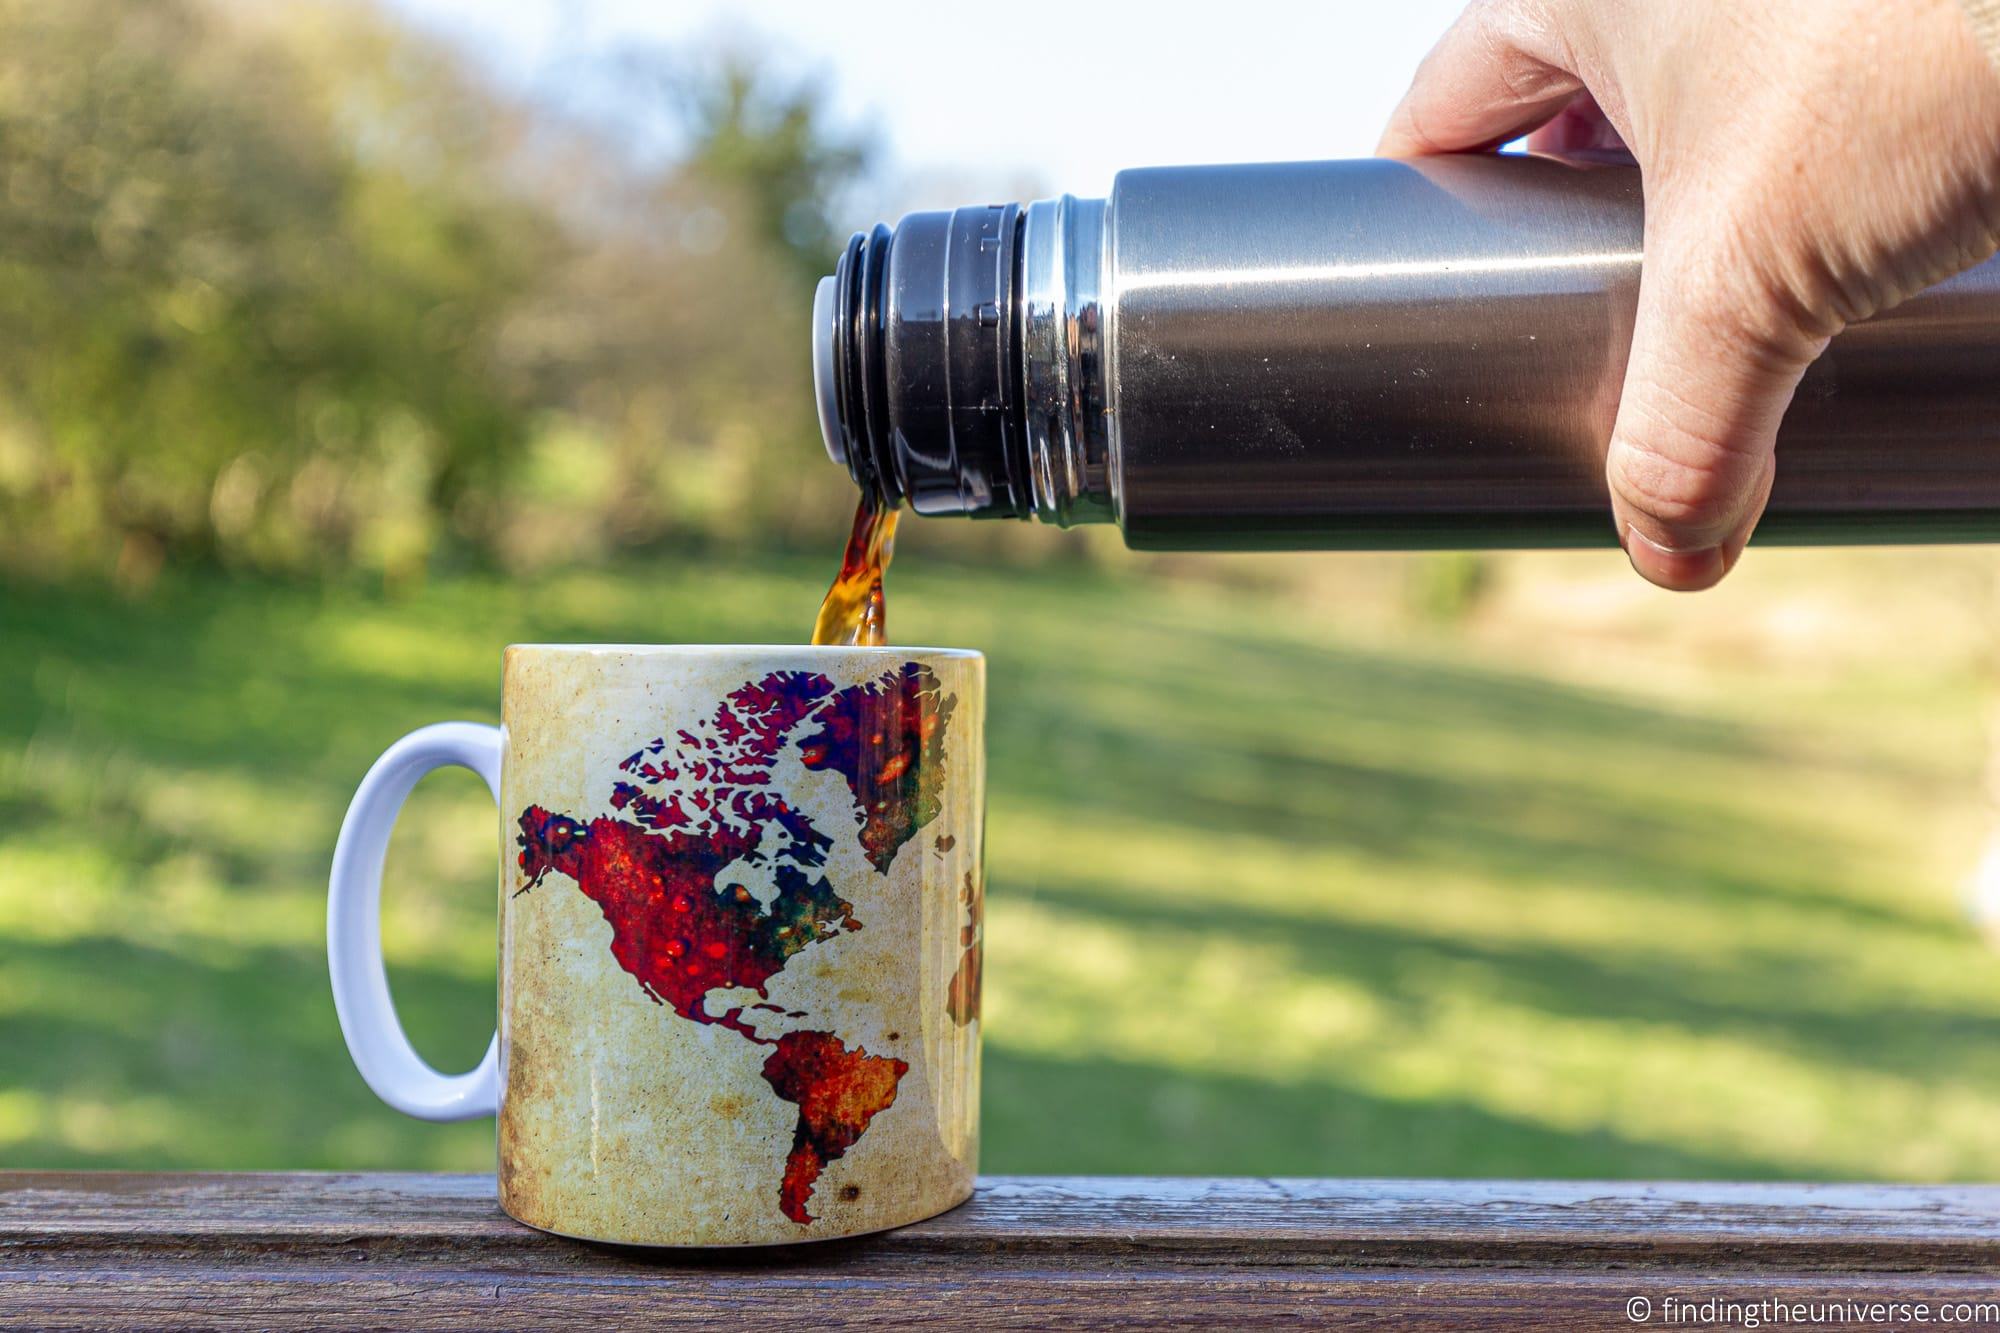 Best Portable Coffee Makers for Travel in 2022